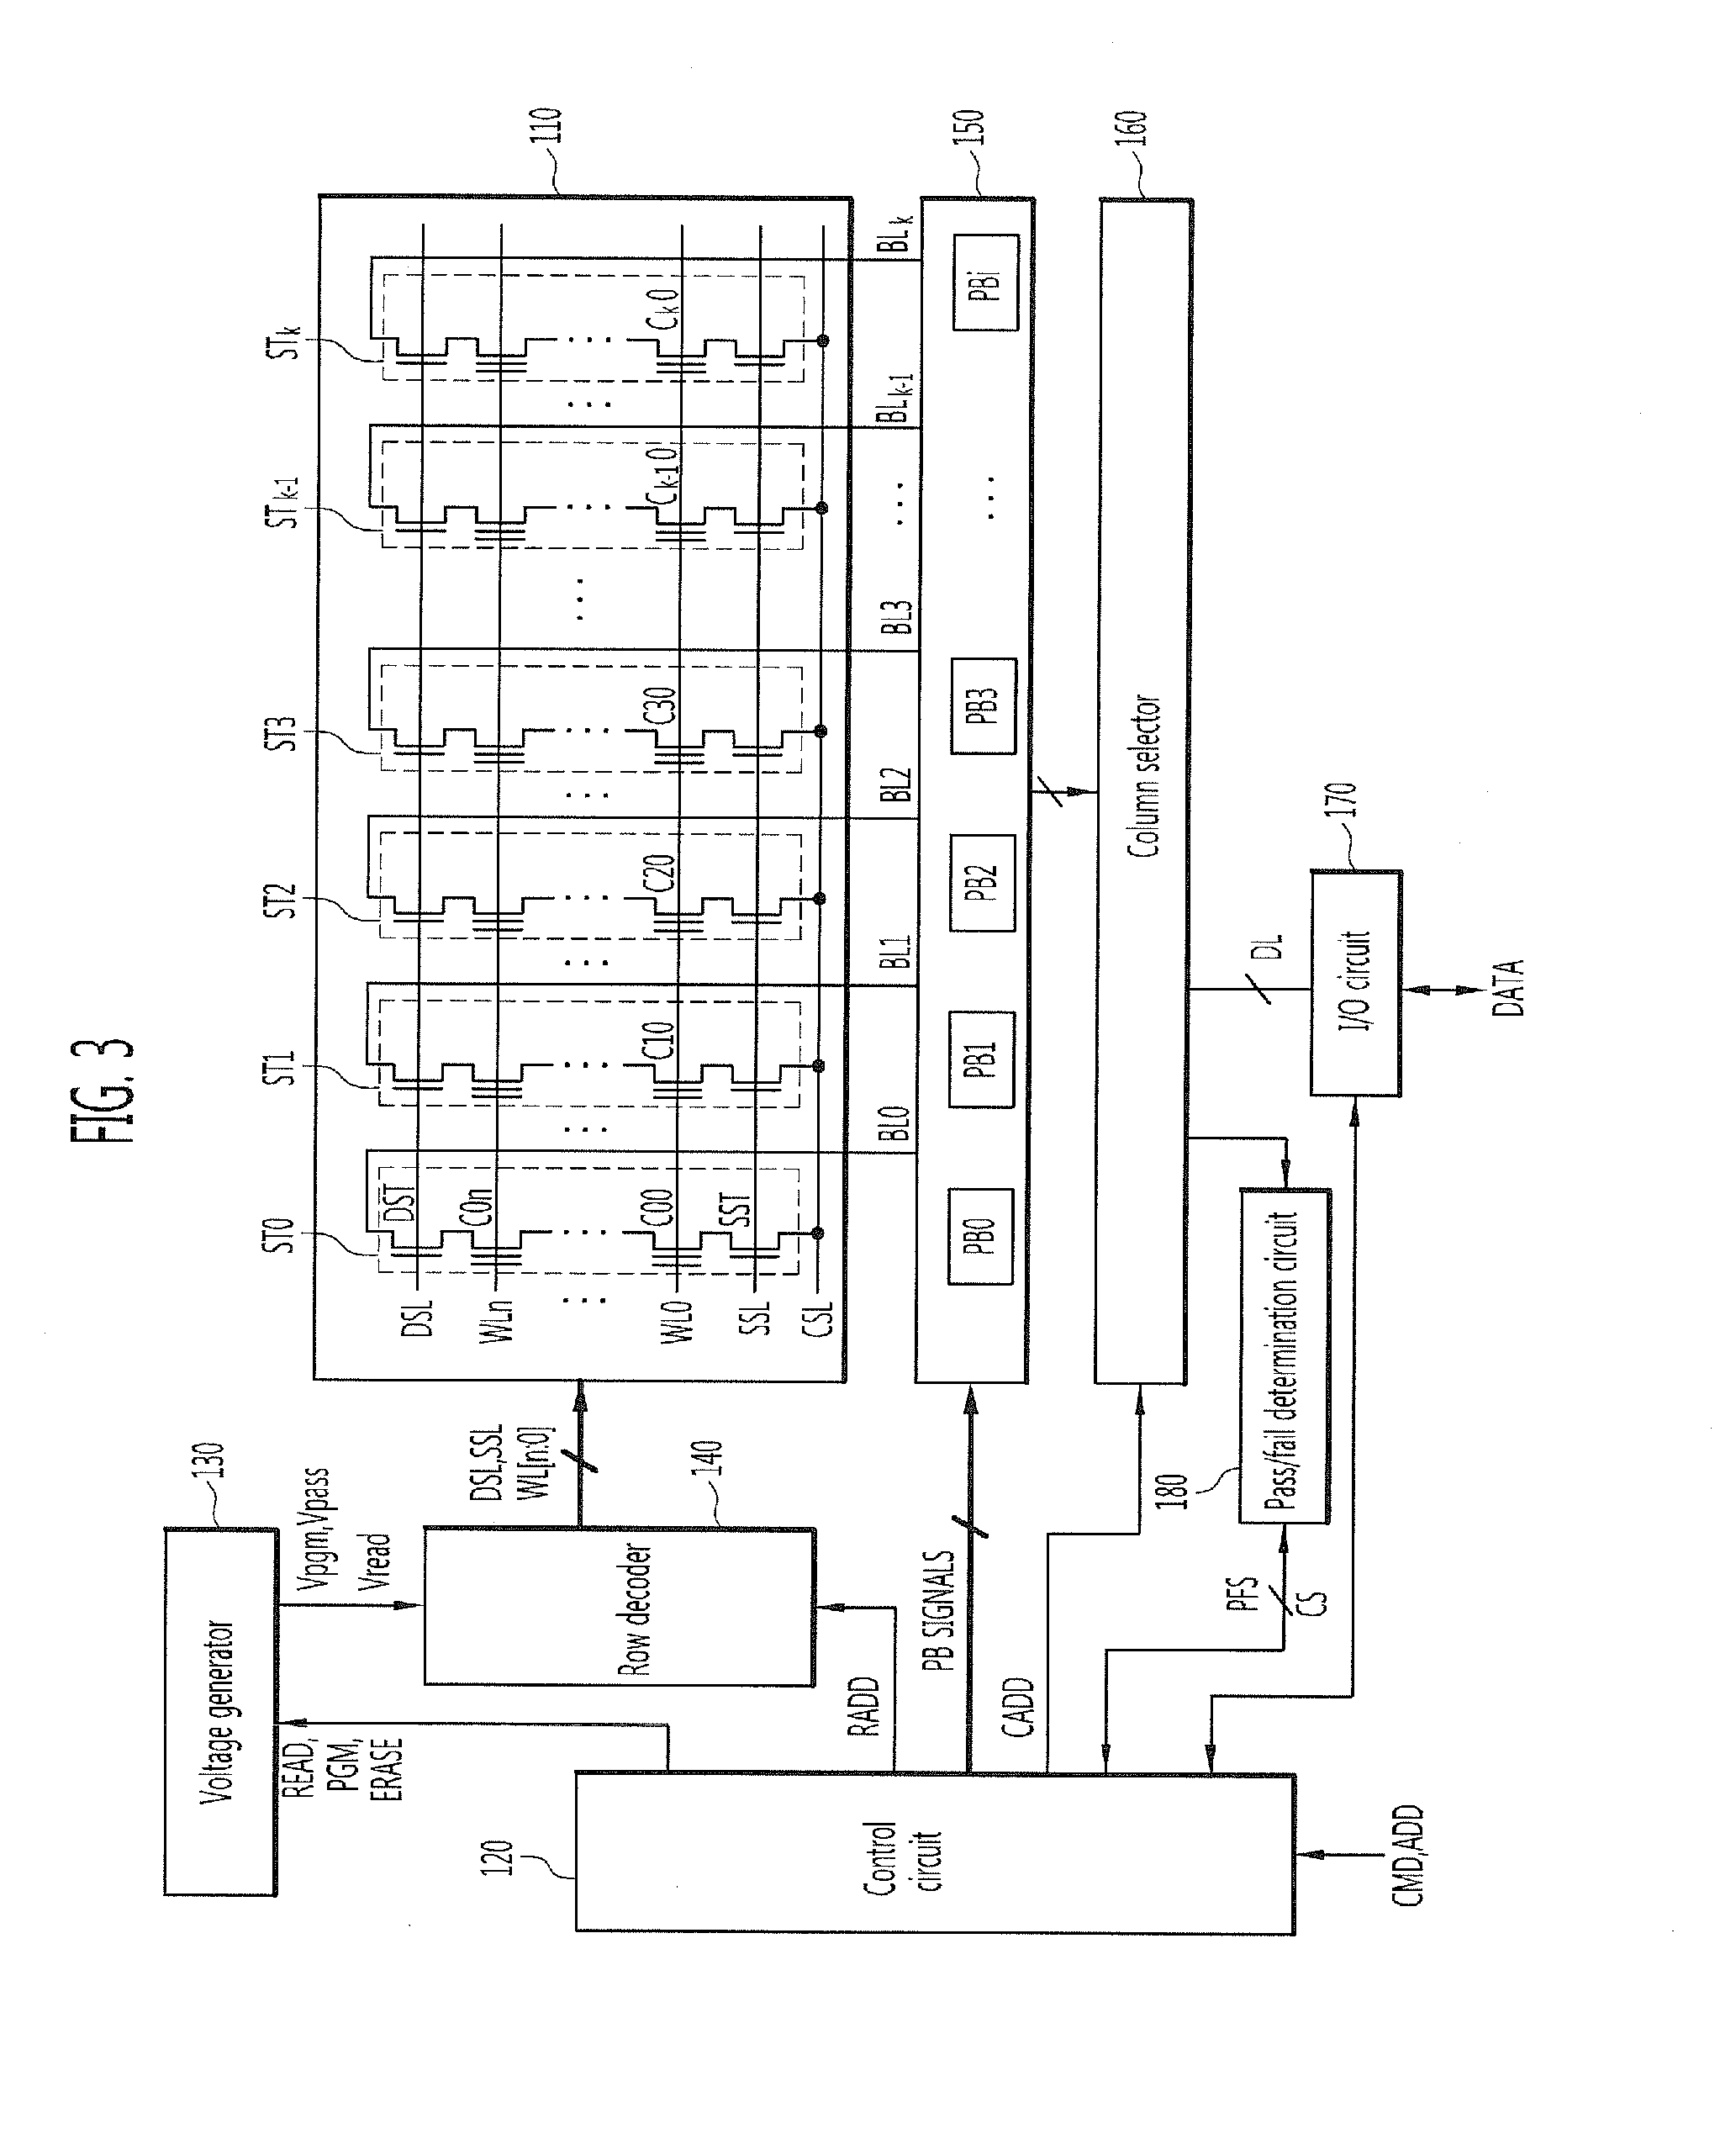 Read methods of semiconductor memory device